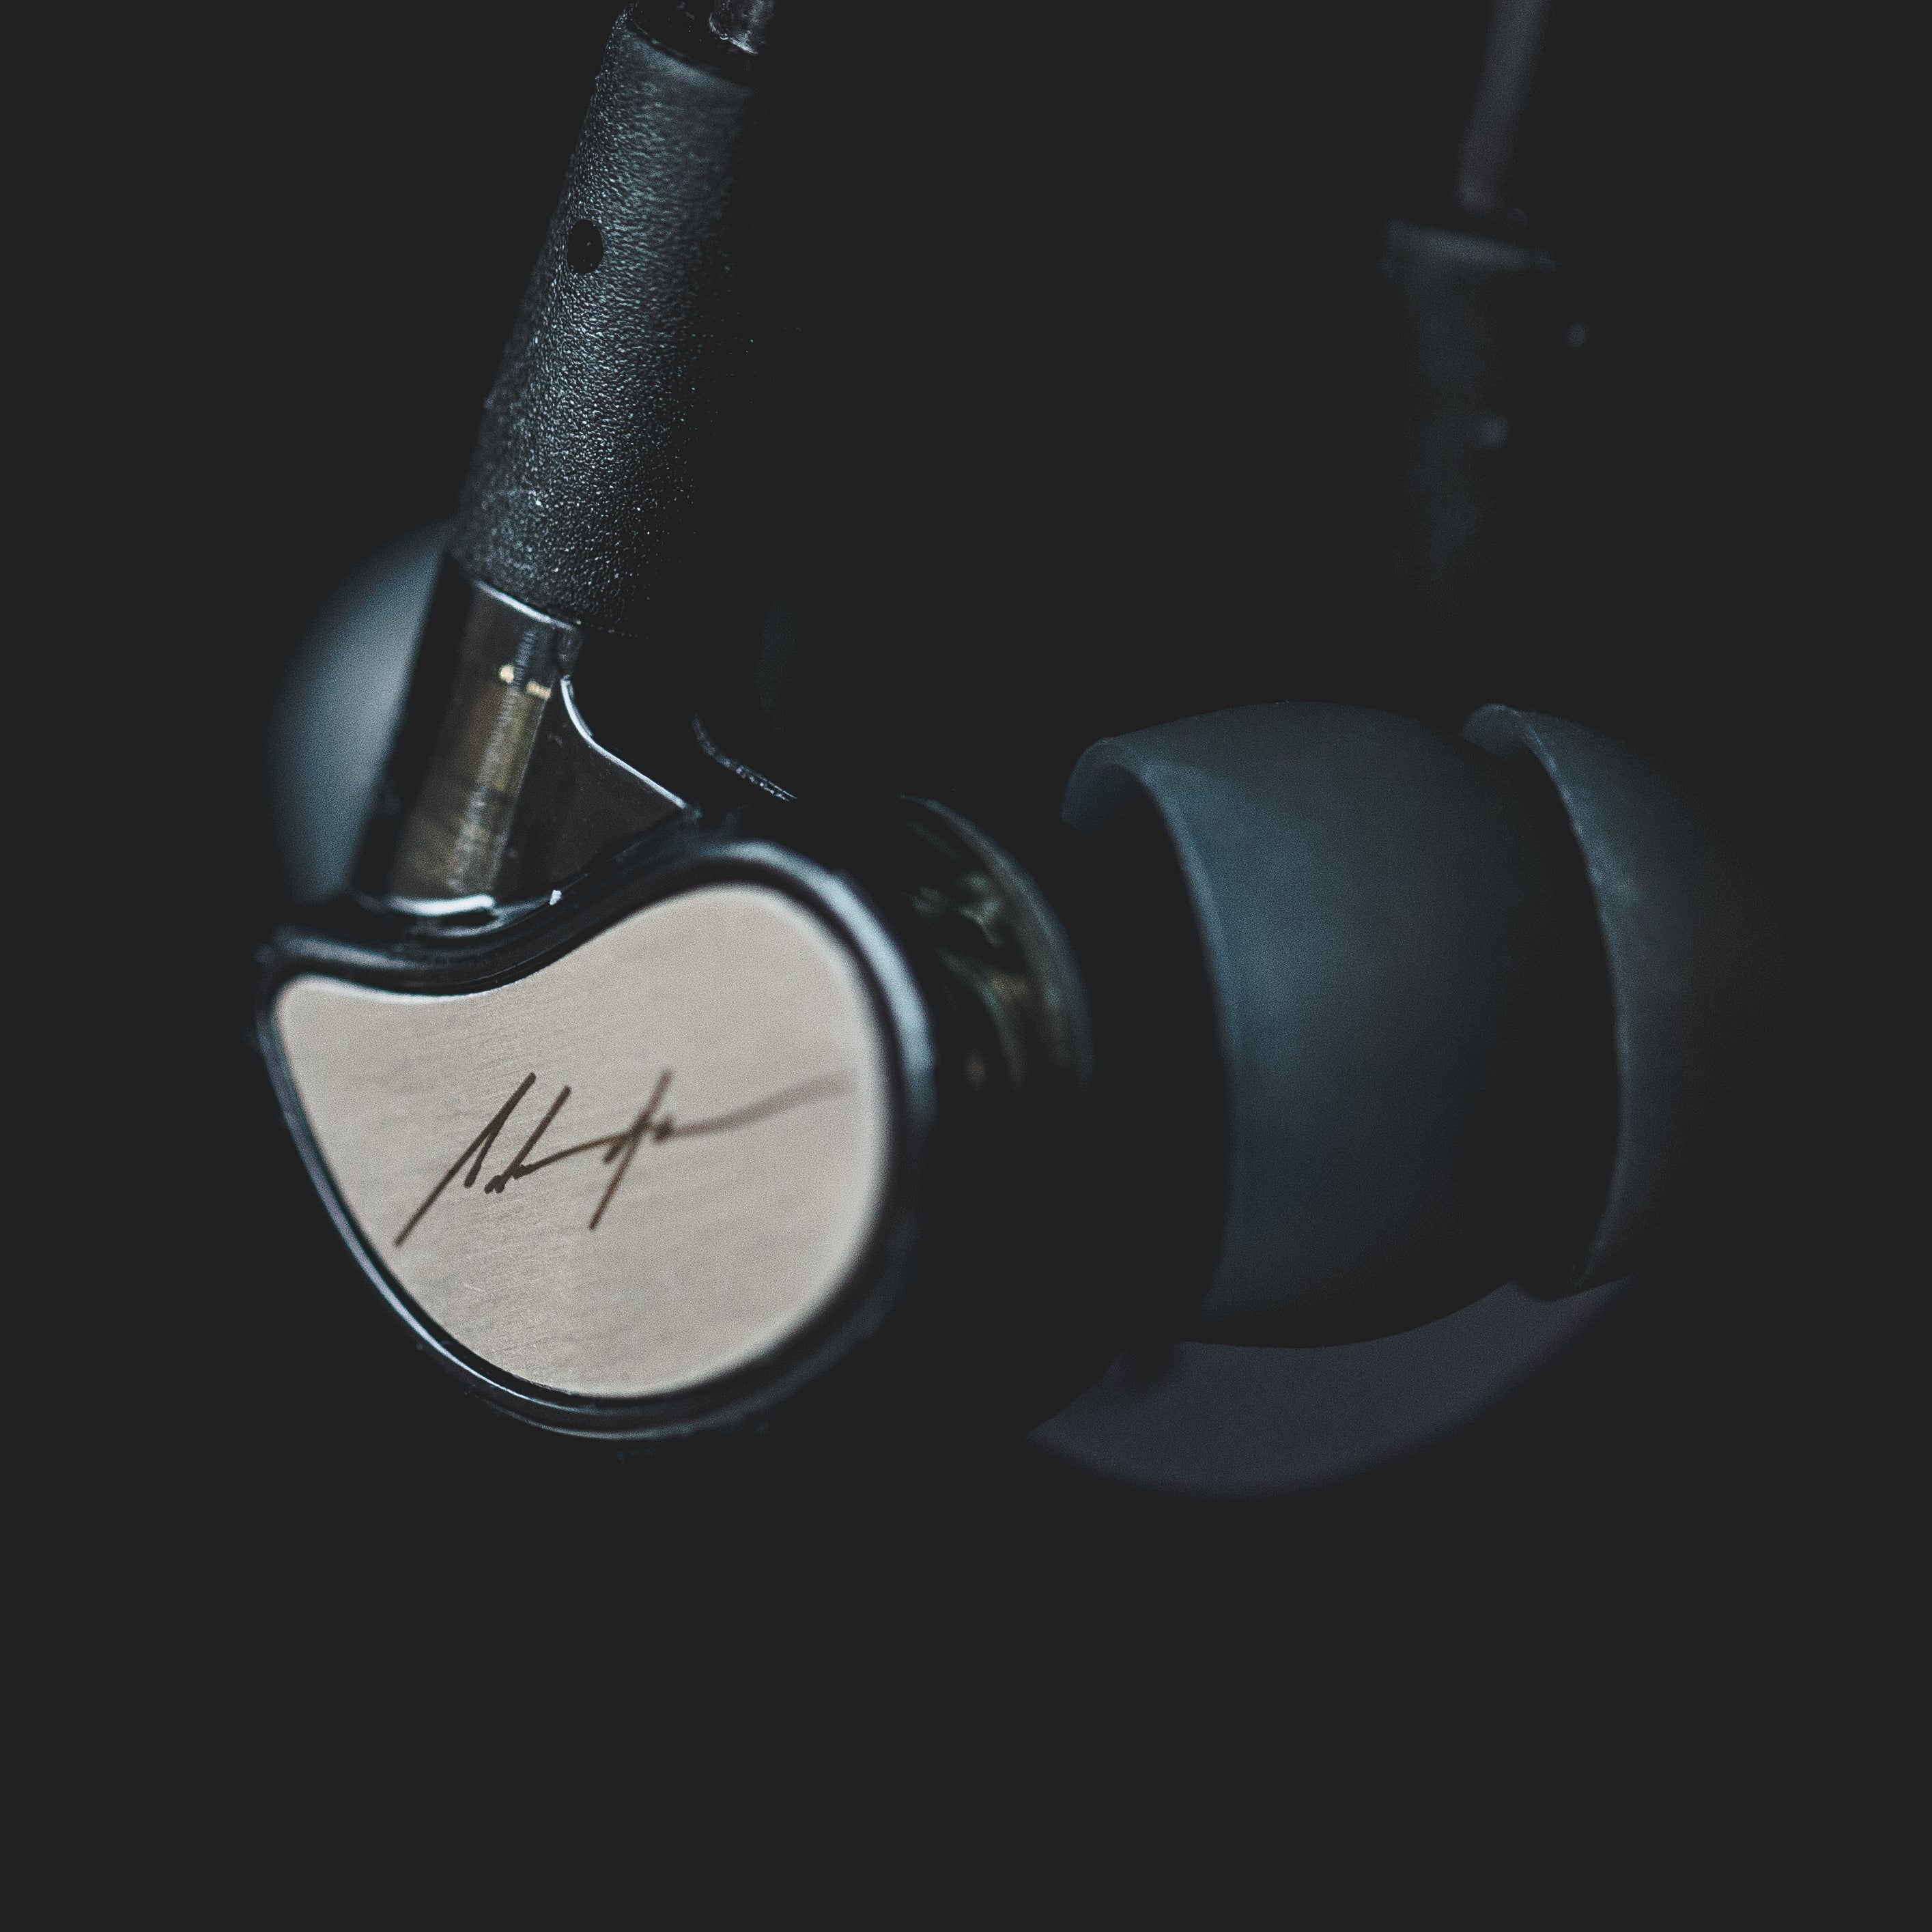 Close-up of a pair of earphones with metallic details and a signature on the earpiece, set against a dark background.